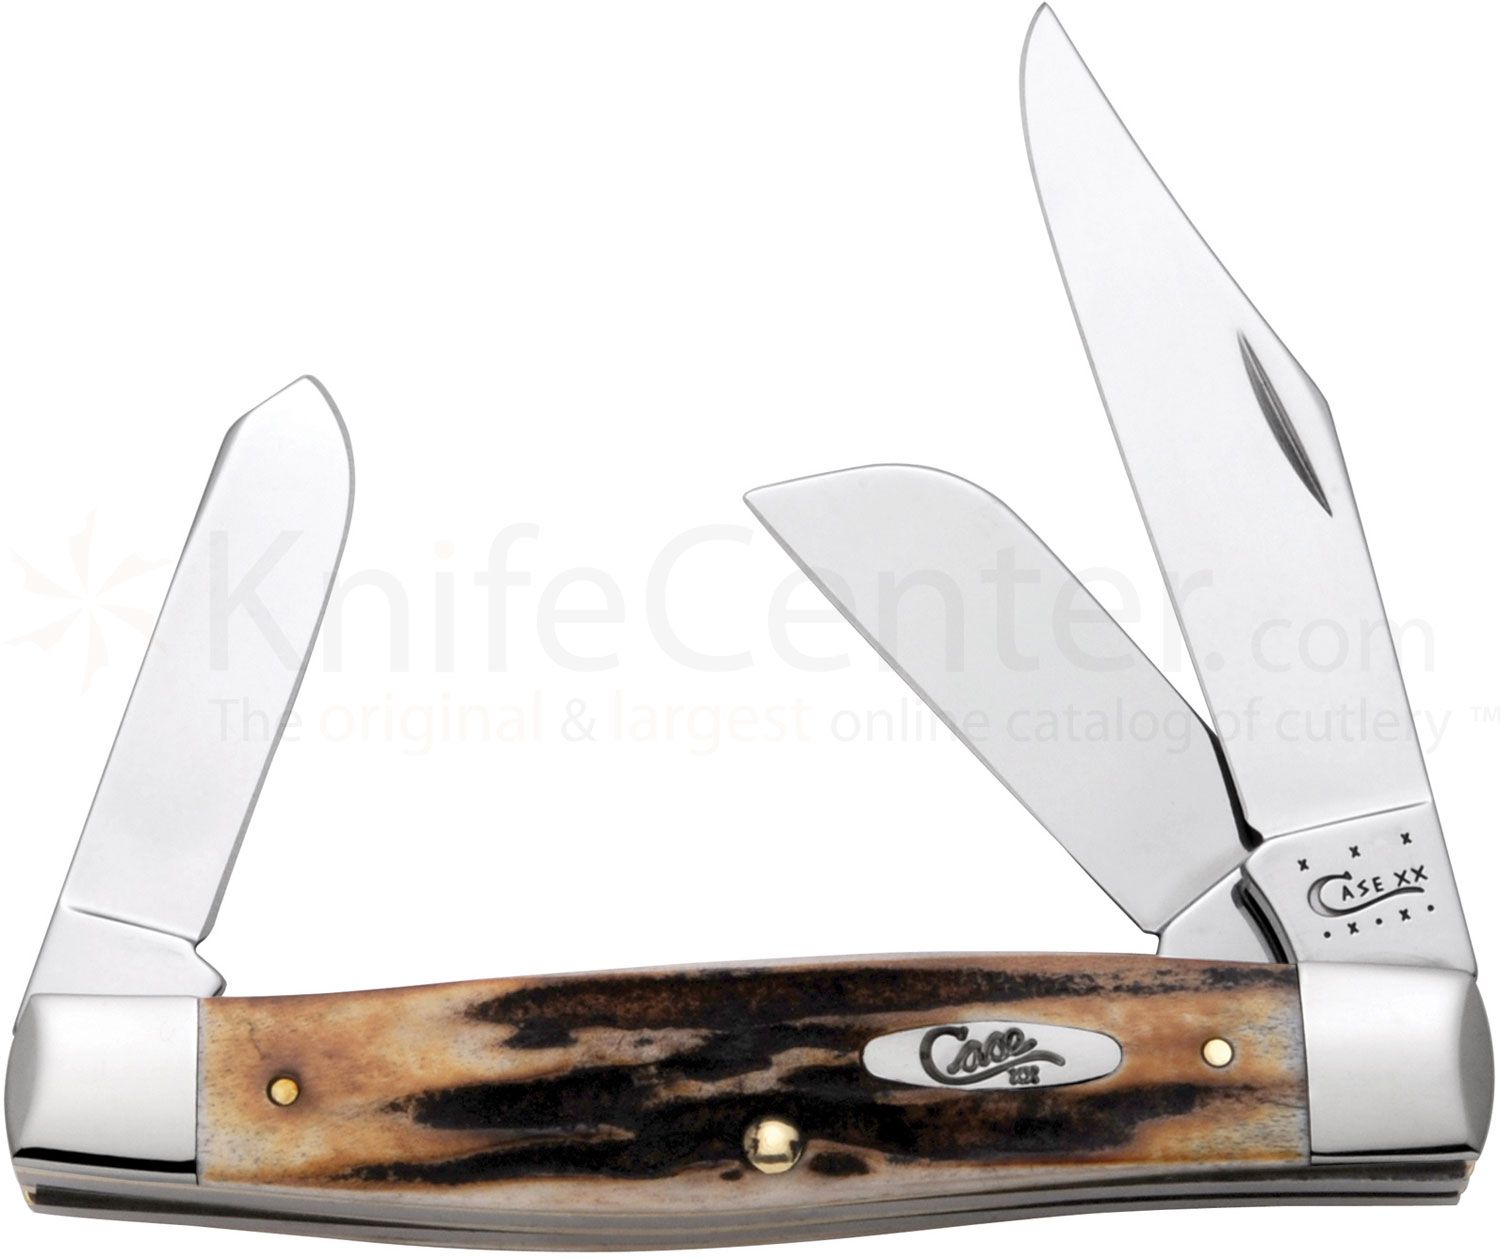 Case Genuine Stag Large Stockman 4-1/8 Closed (5375 SS) - KnifeCenter -  10400 - Discontinued